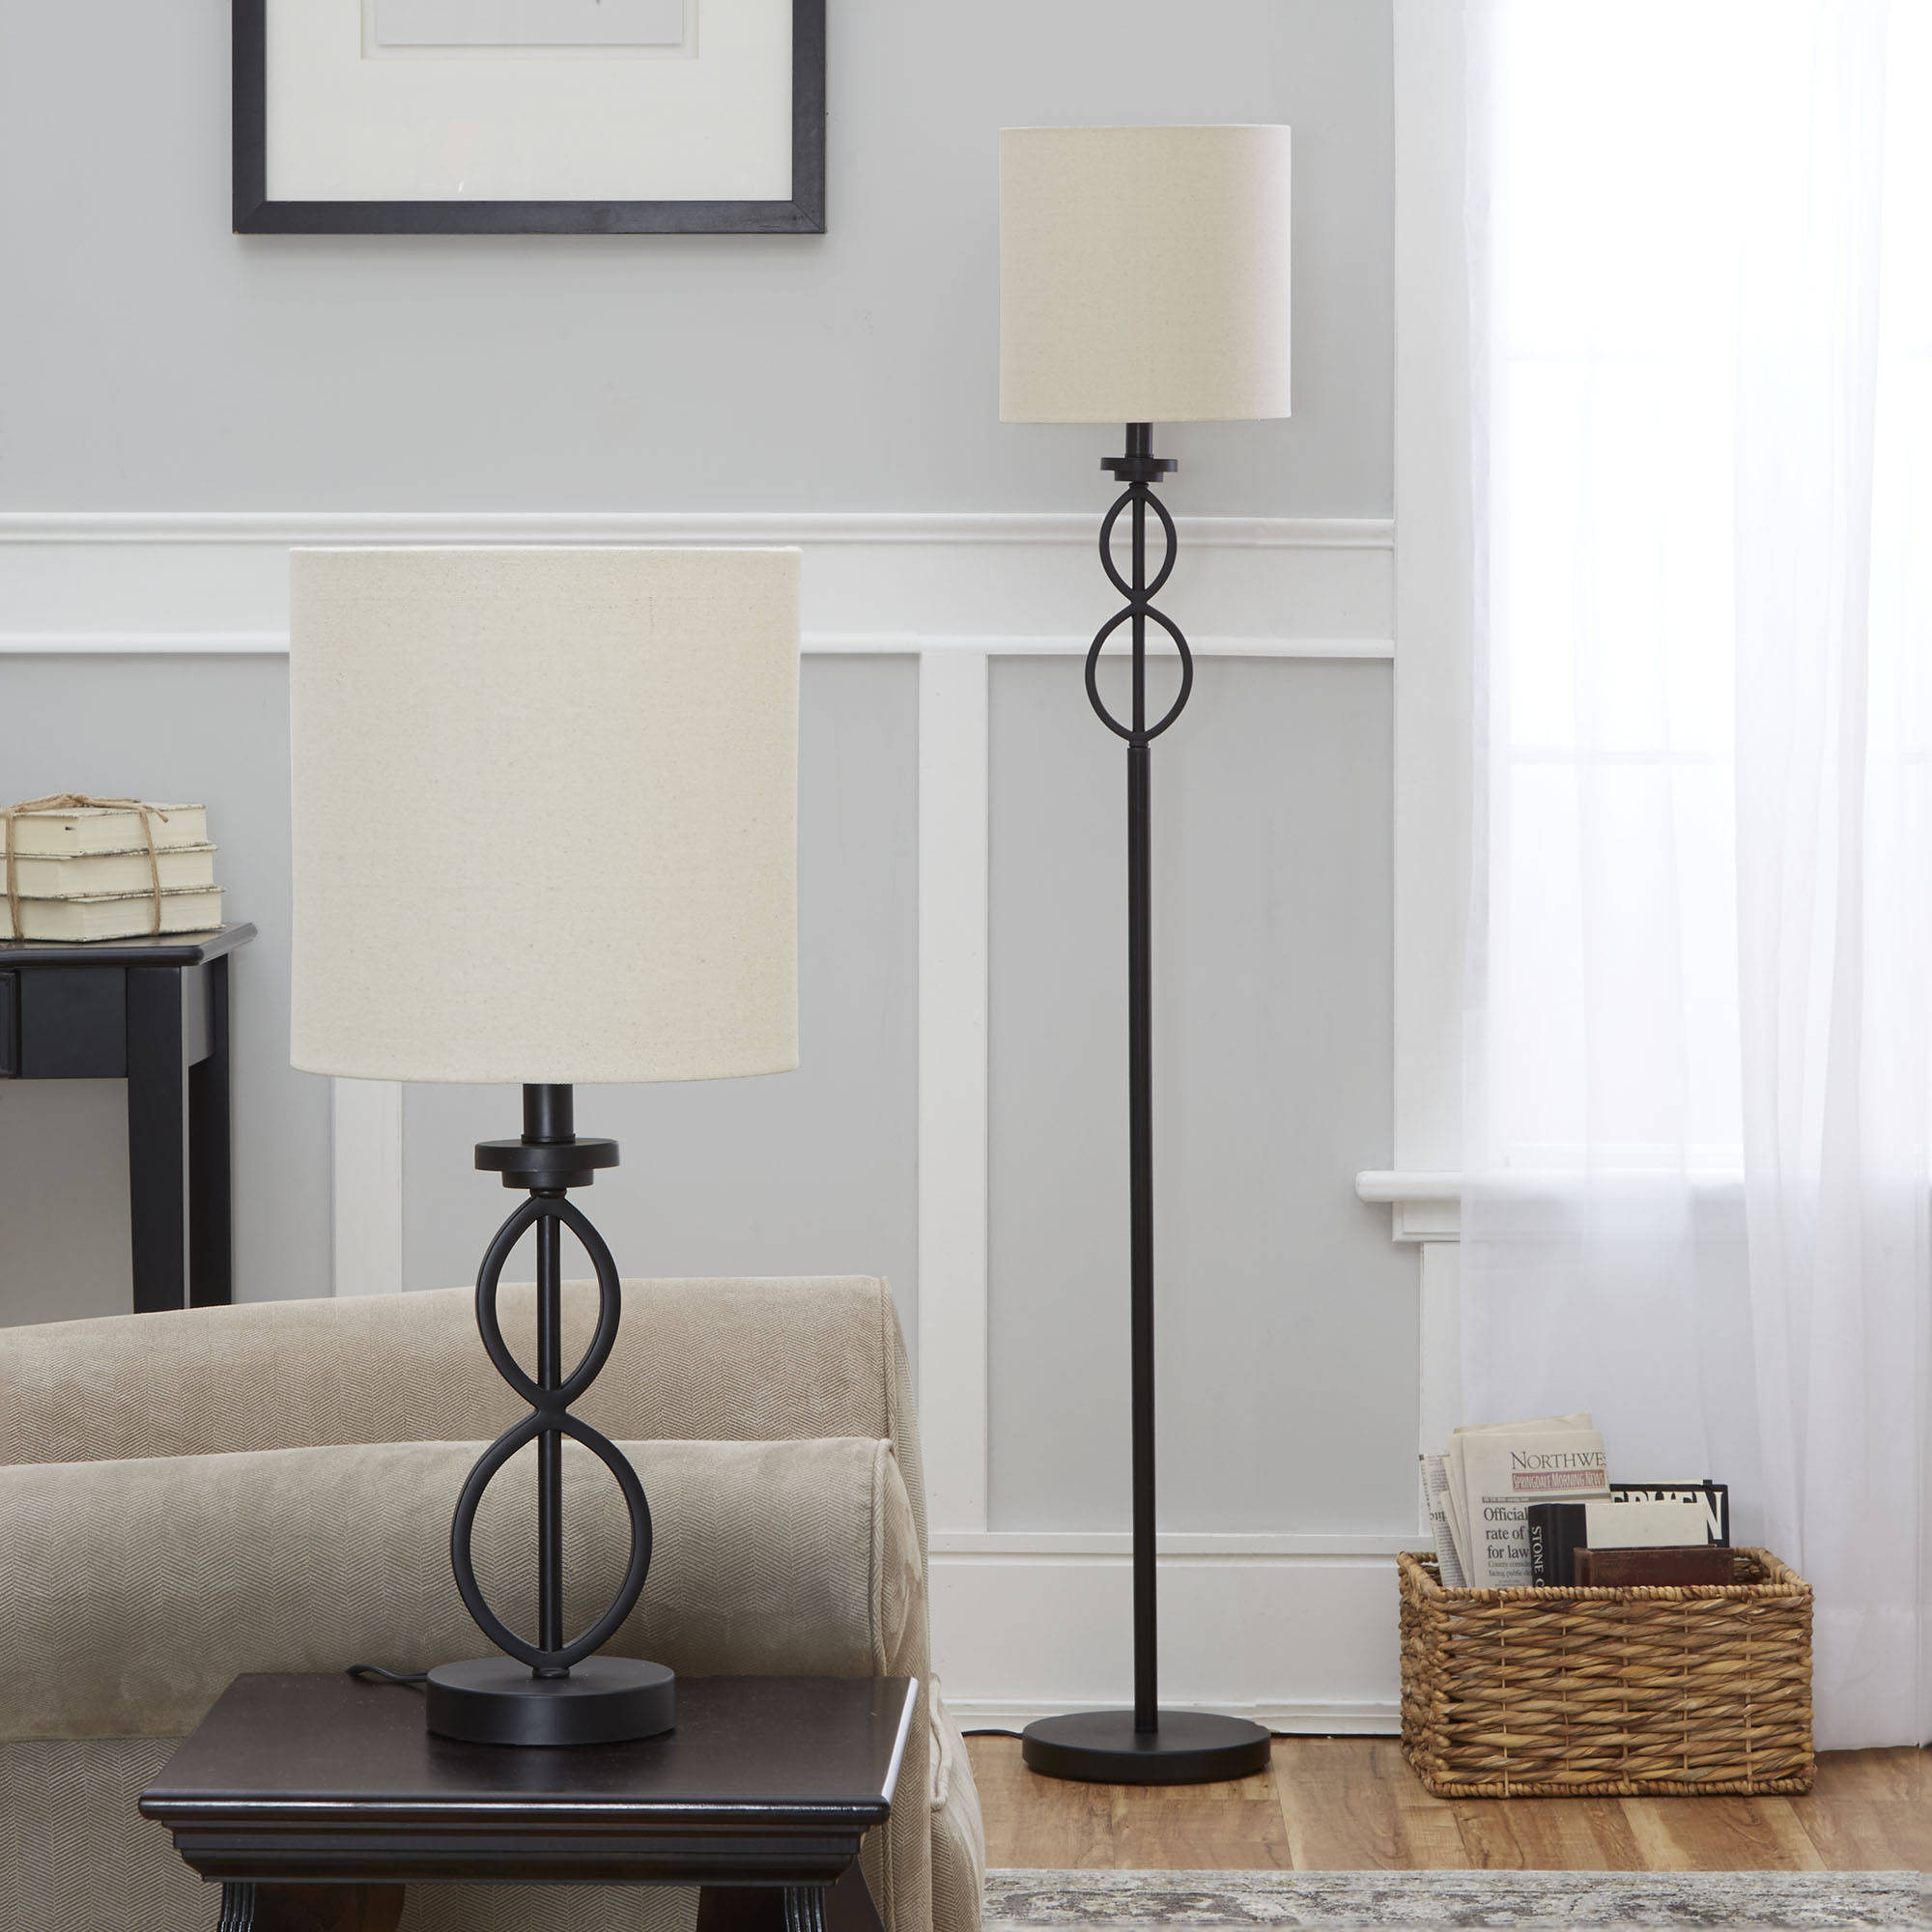 Mainstays Table and Floor Lamp Set, Black, CFL Bulbs Included - image 3 of 5